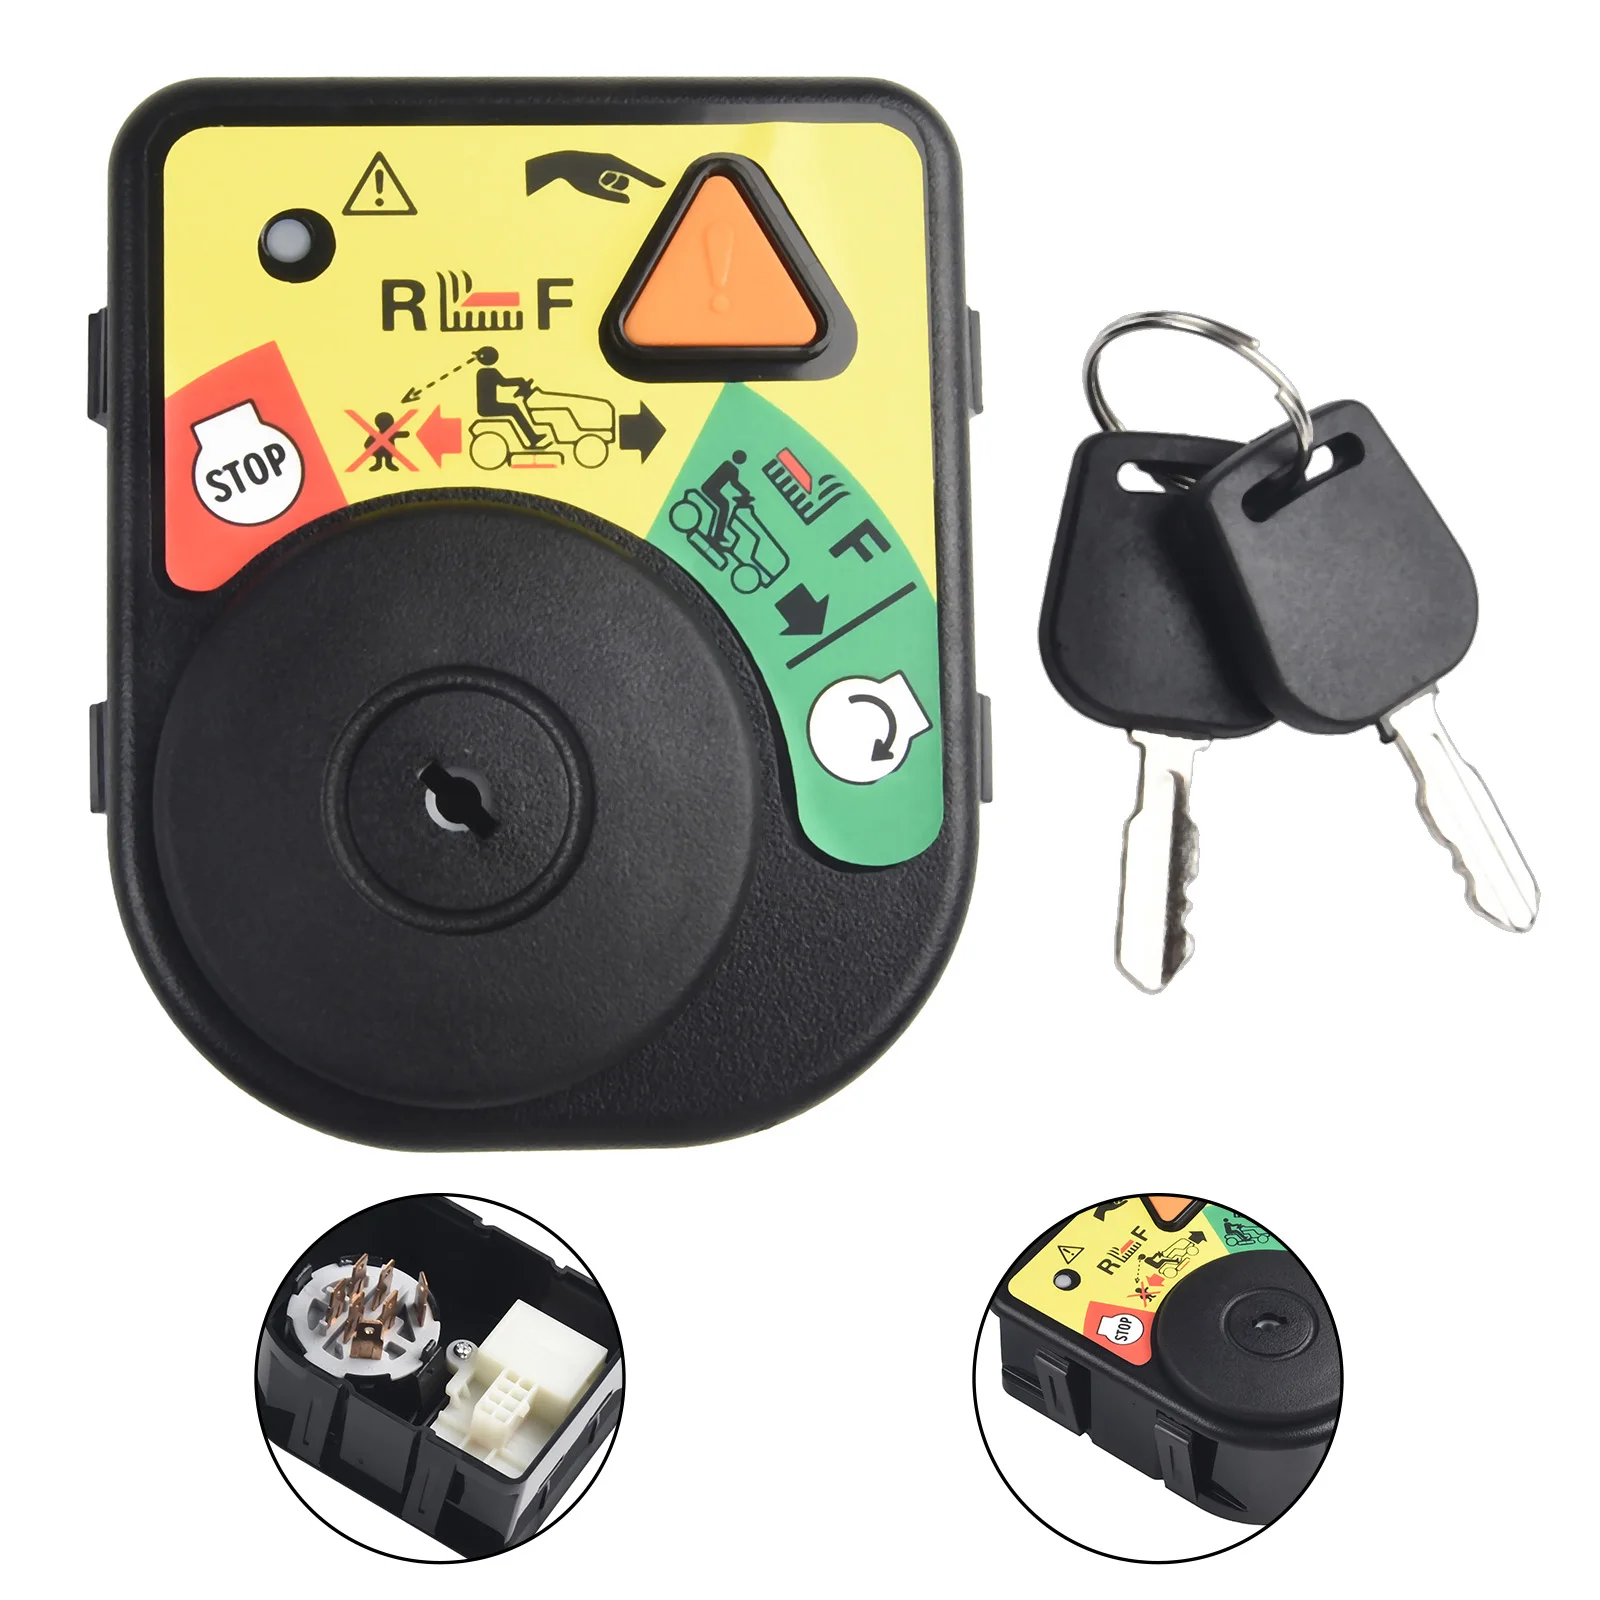 Key Ignition Switch For Cub Cadet Most Consumer Riding Mowers 725-04230 Ignition Switch&Key Direct Replacement Plastic